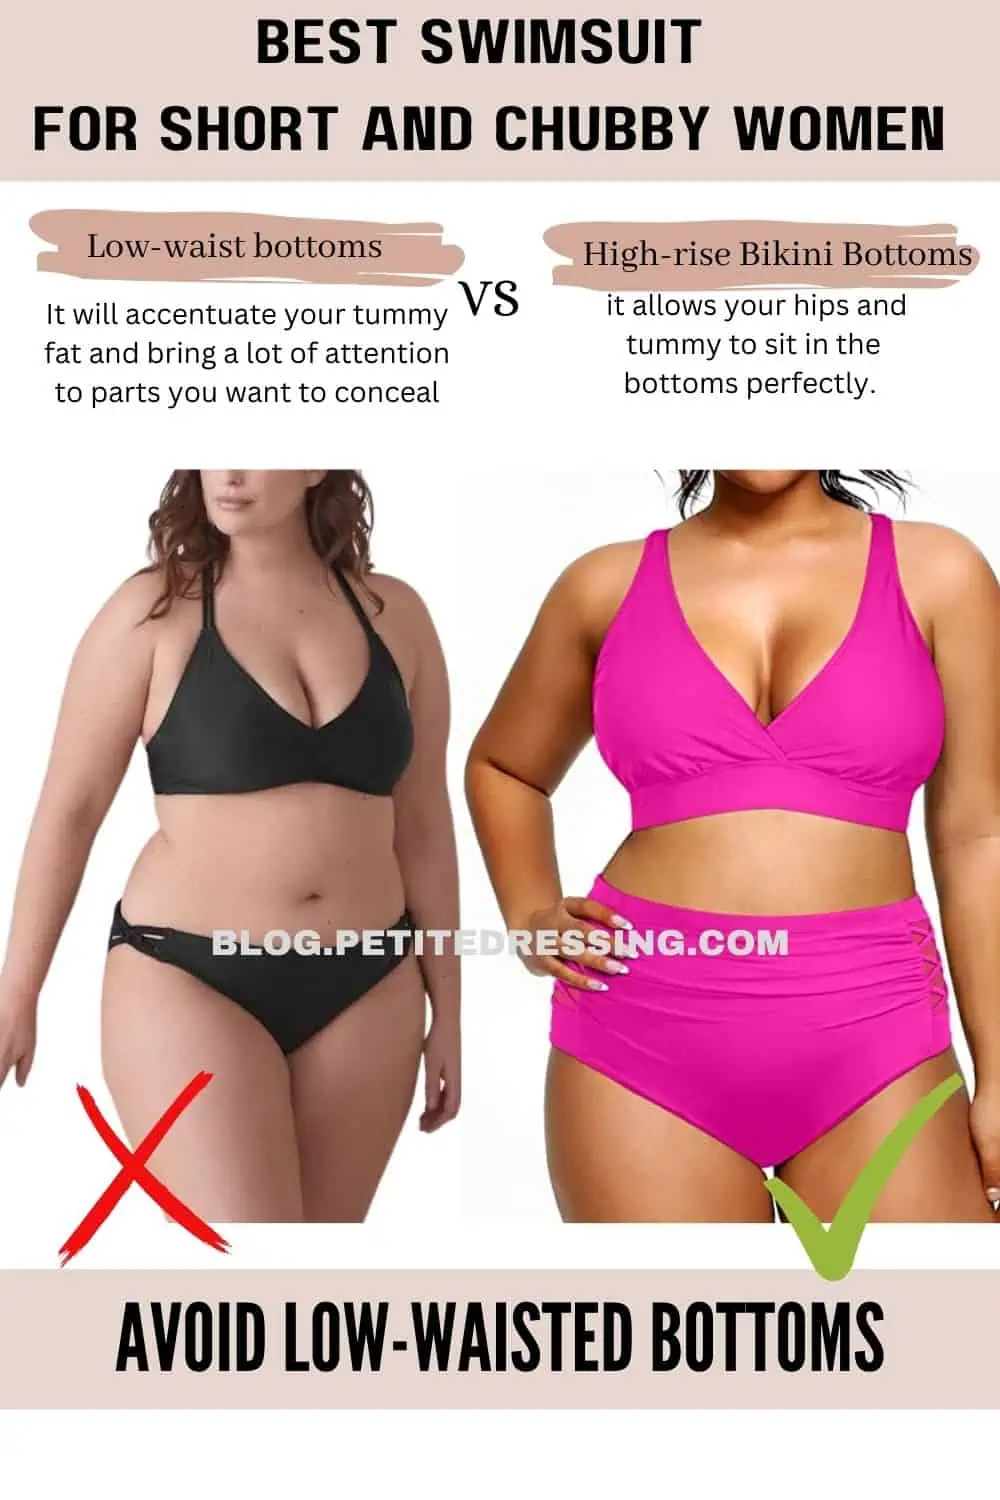 The Complete Swimsuit Guide for Short and Chubby Women - Petite